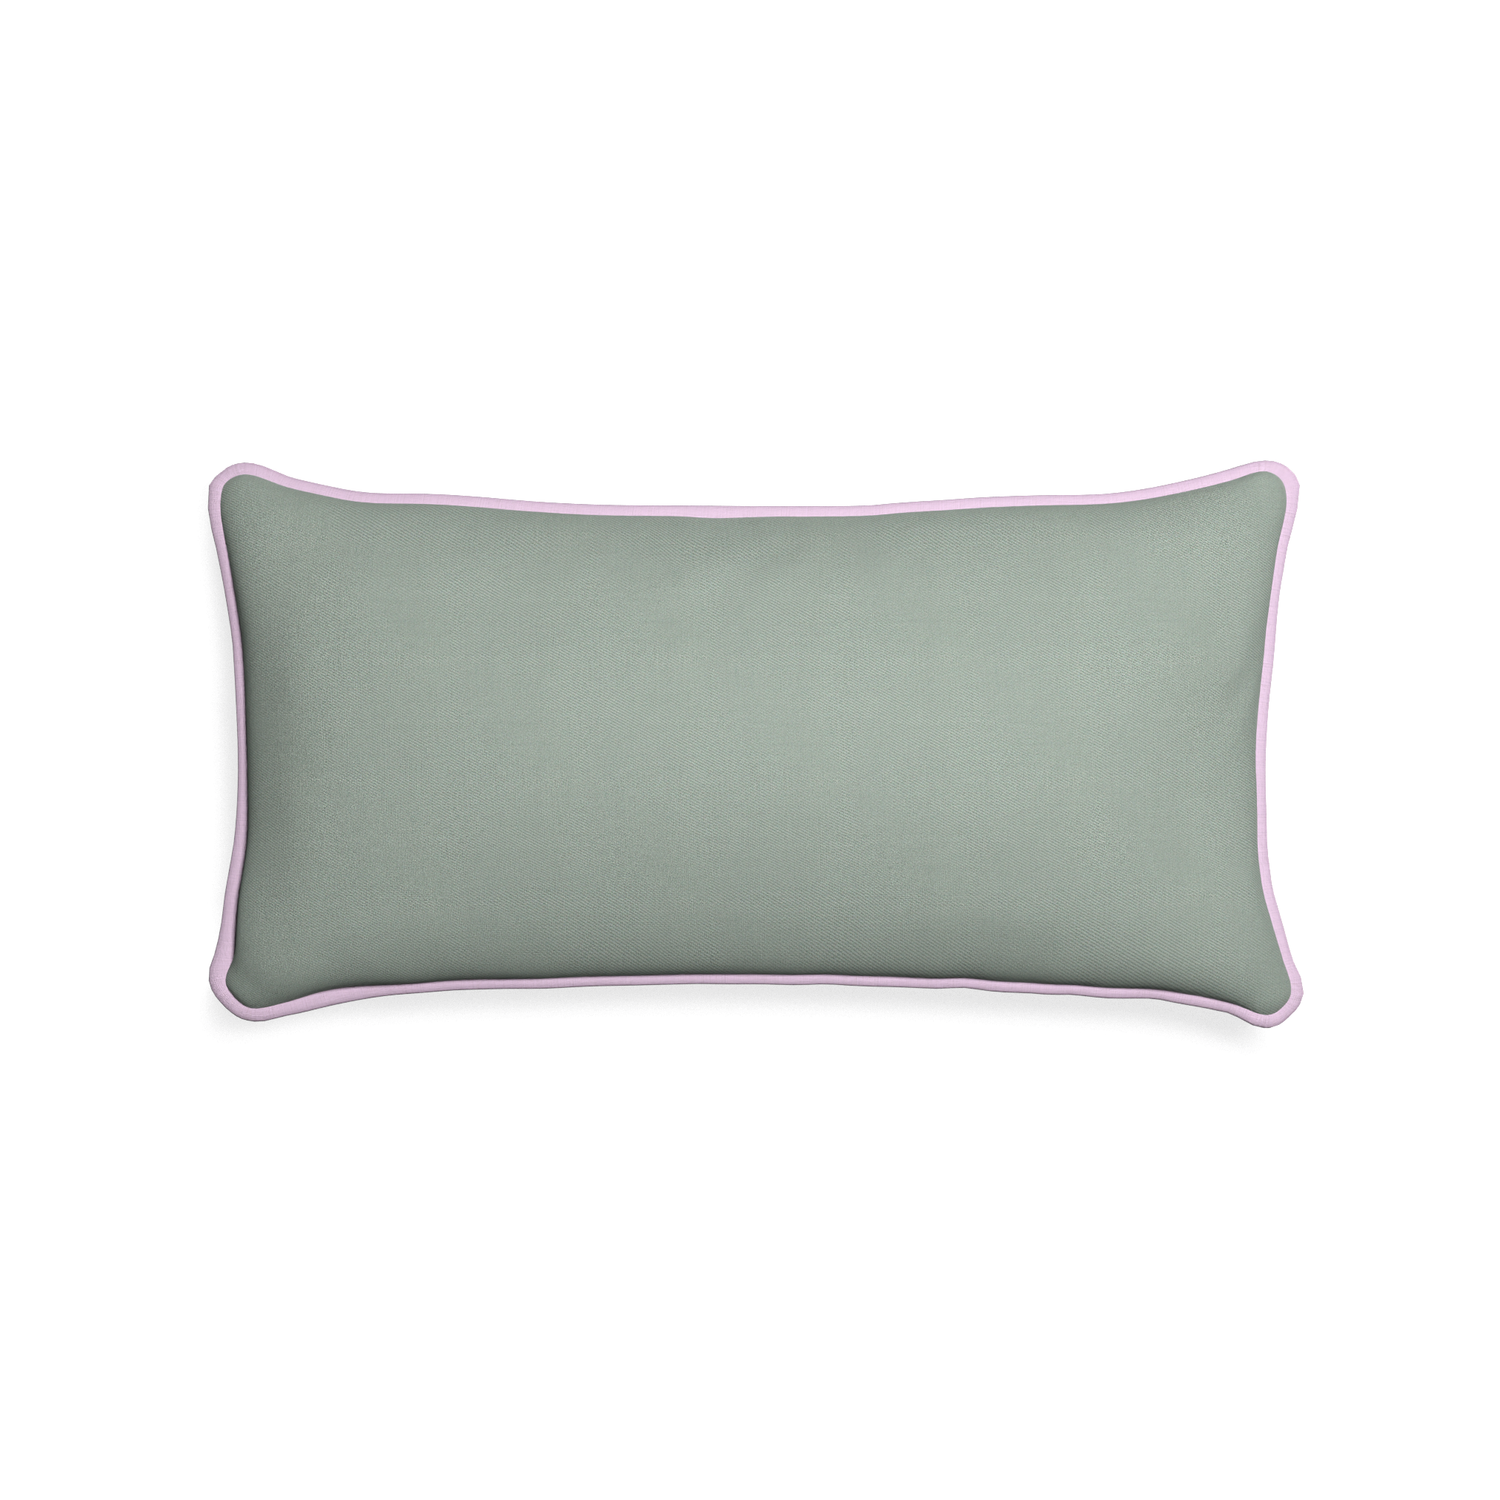 Midi-lumbar sage custom sage green cottonpillow with l piping on white background